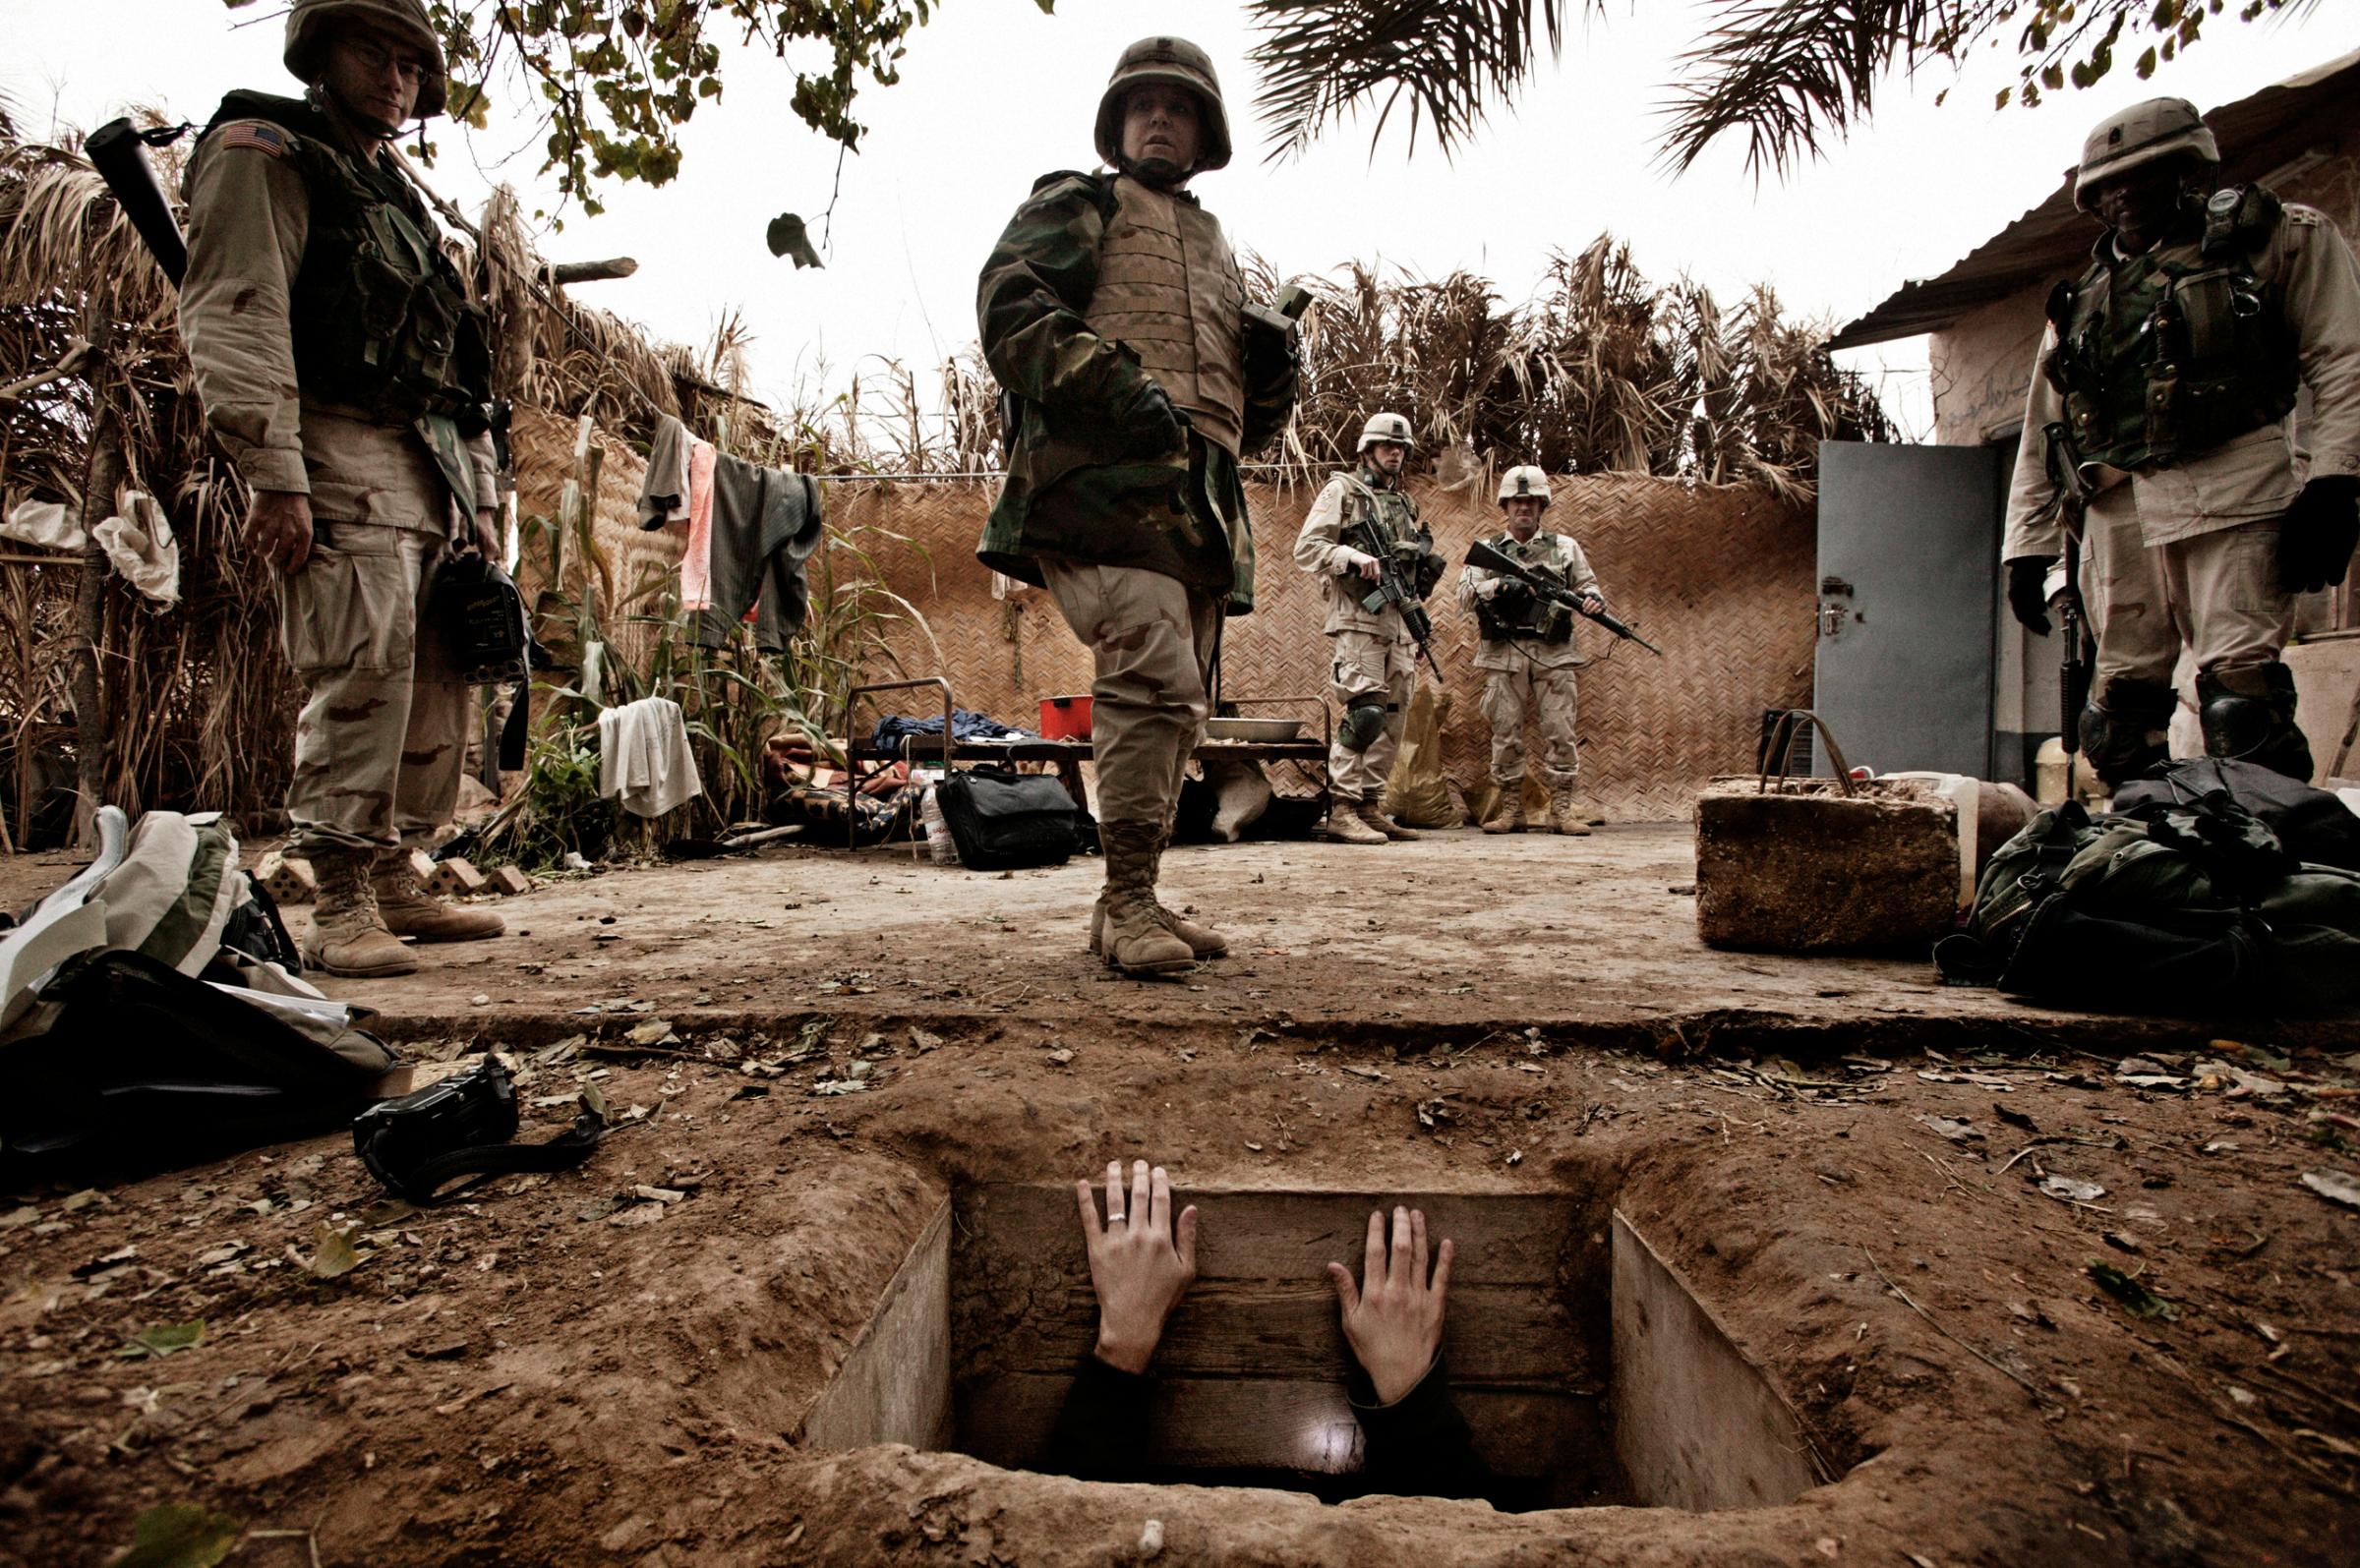 A jounalist climbs out of the hole where toppled dictator Saddam Hussein was captured in Ad Dawr, Iraq, near his hometown of Tikrit, Dec. 15, 2003.